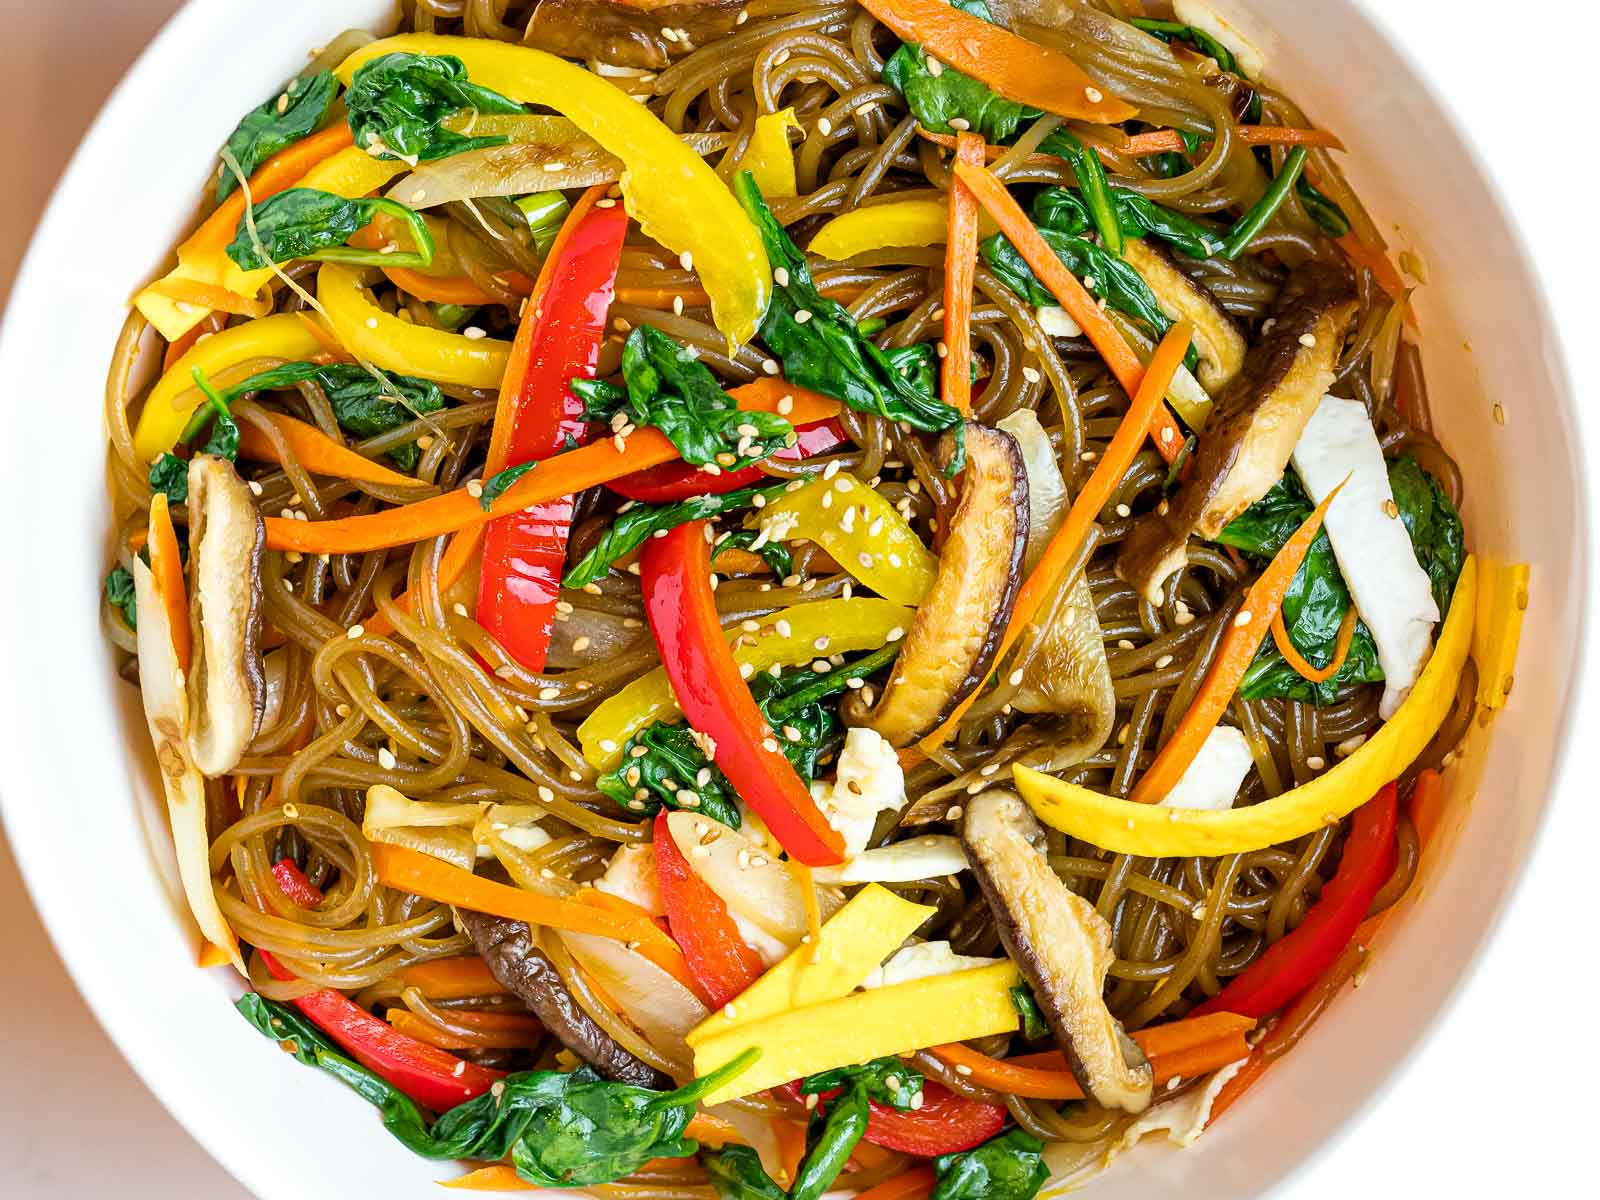 Korean japchae noodles with mushrooms, red peppers, carrots, and spinach